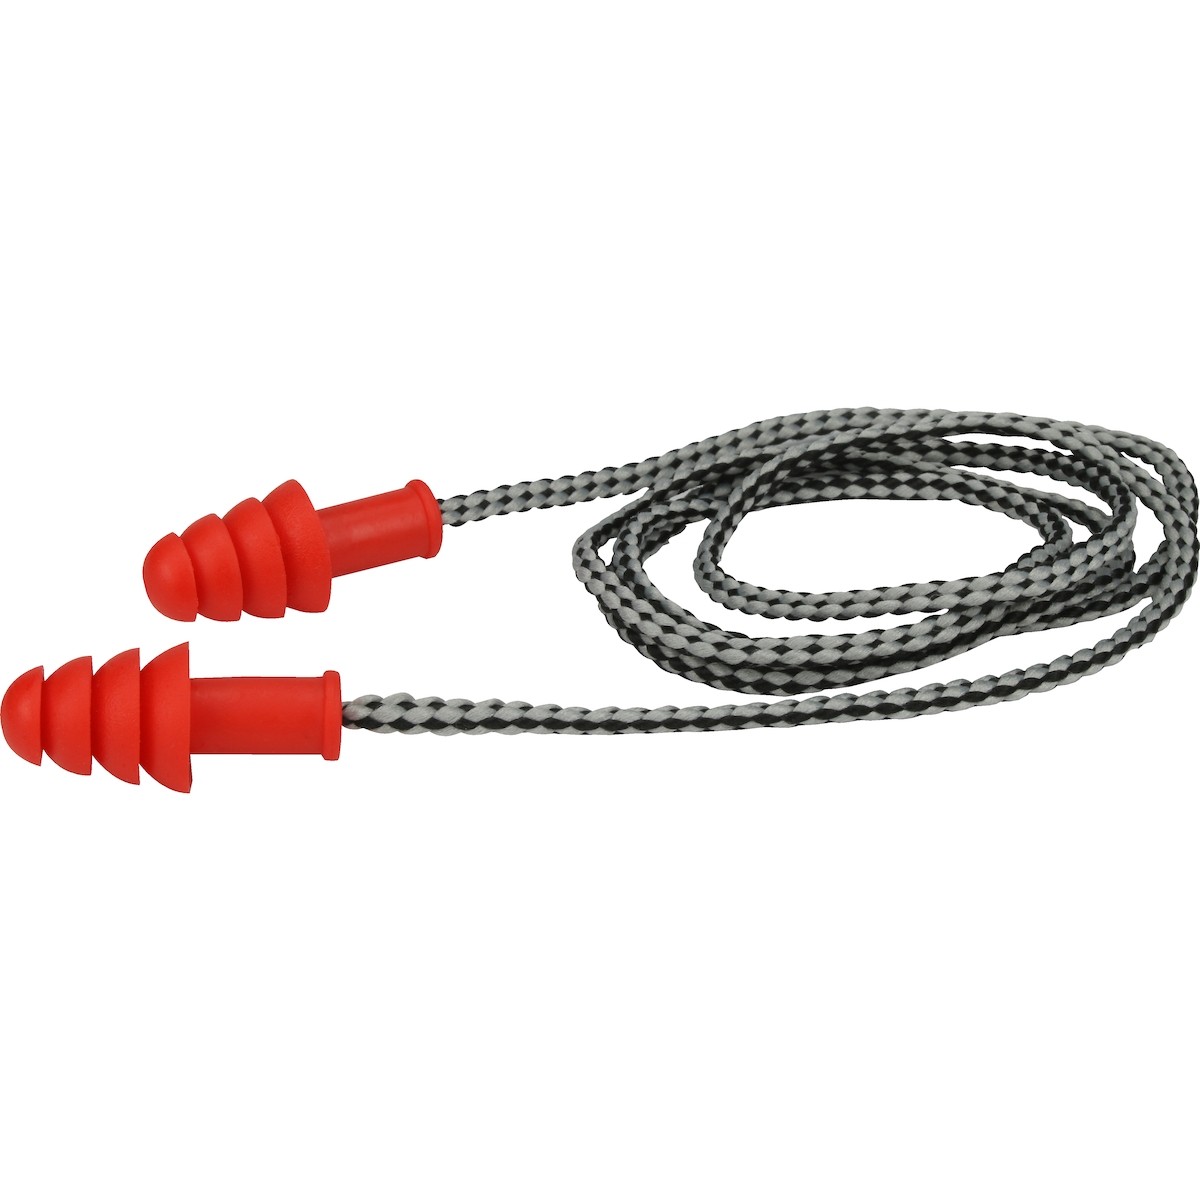 Reusable TPR Corded Ear Plugs 